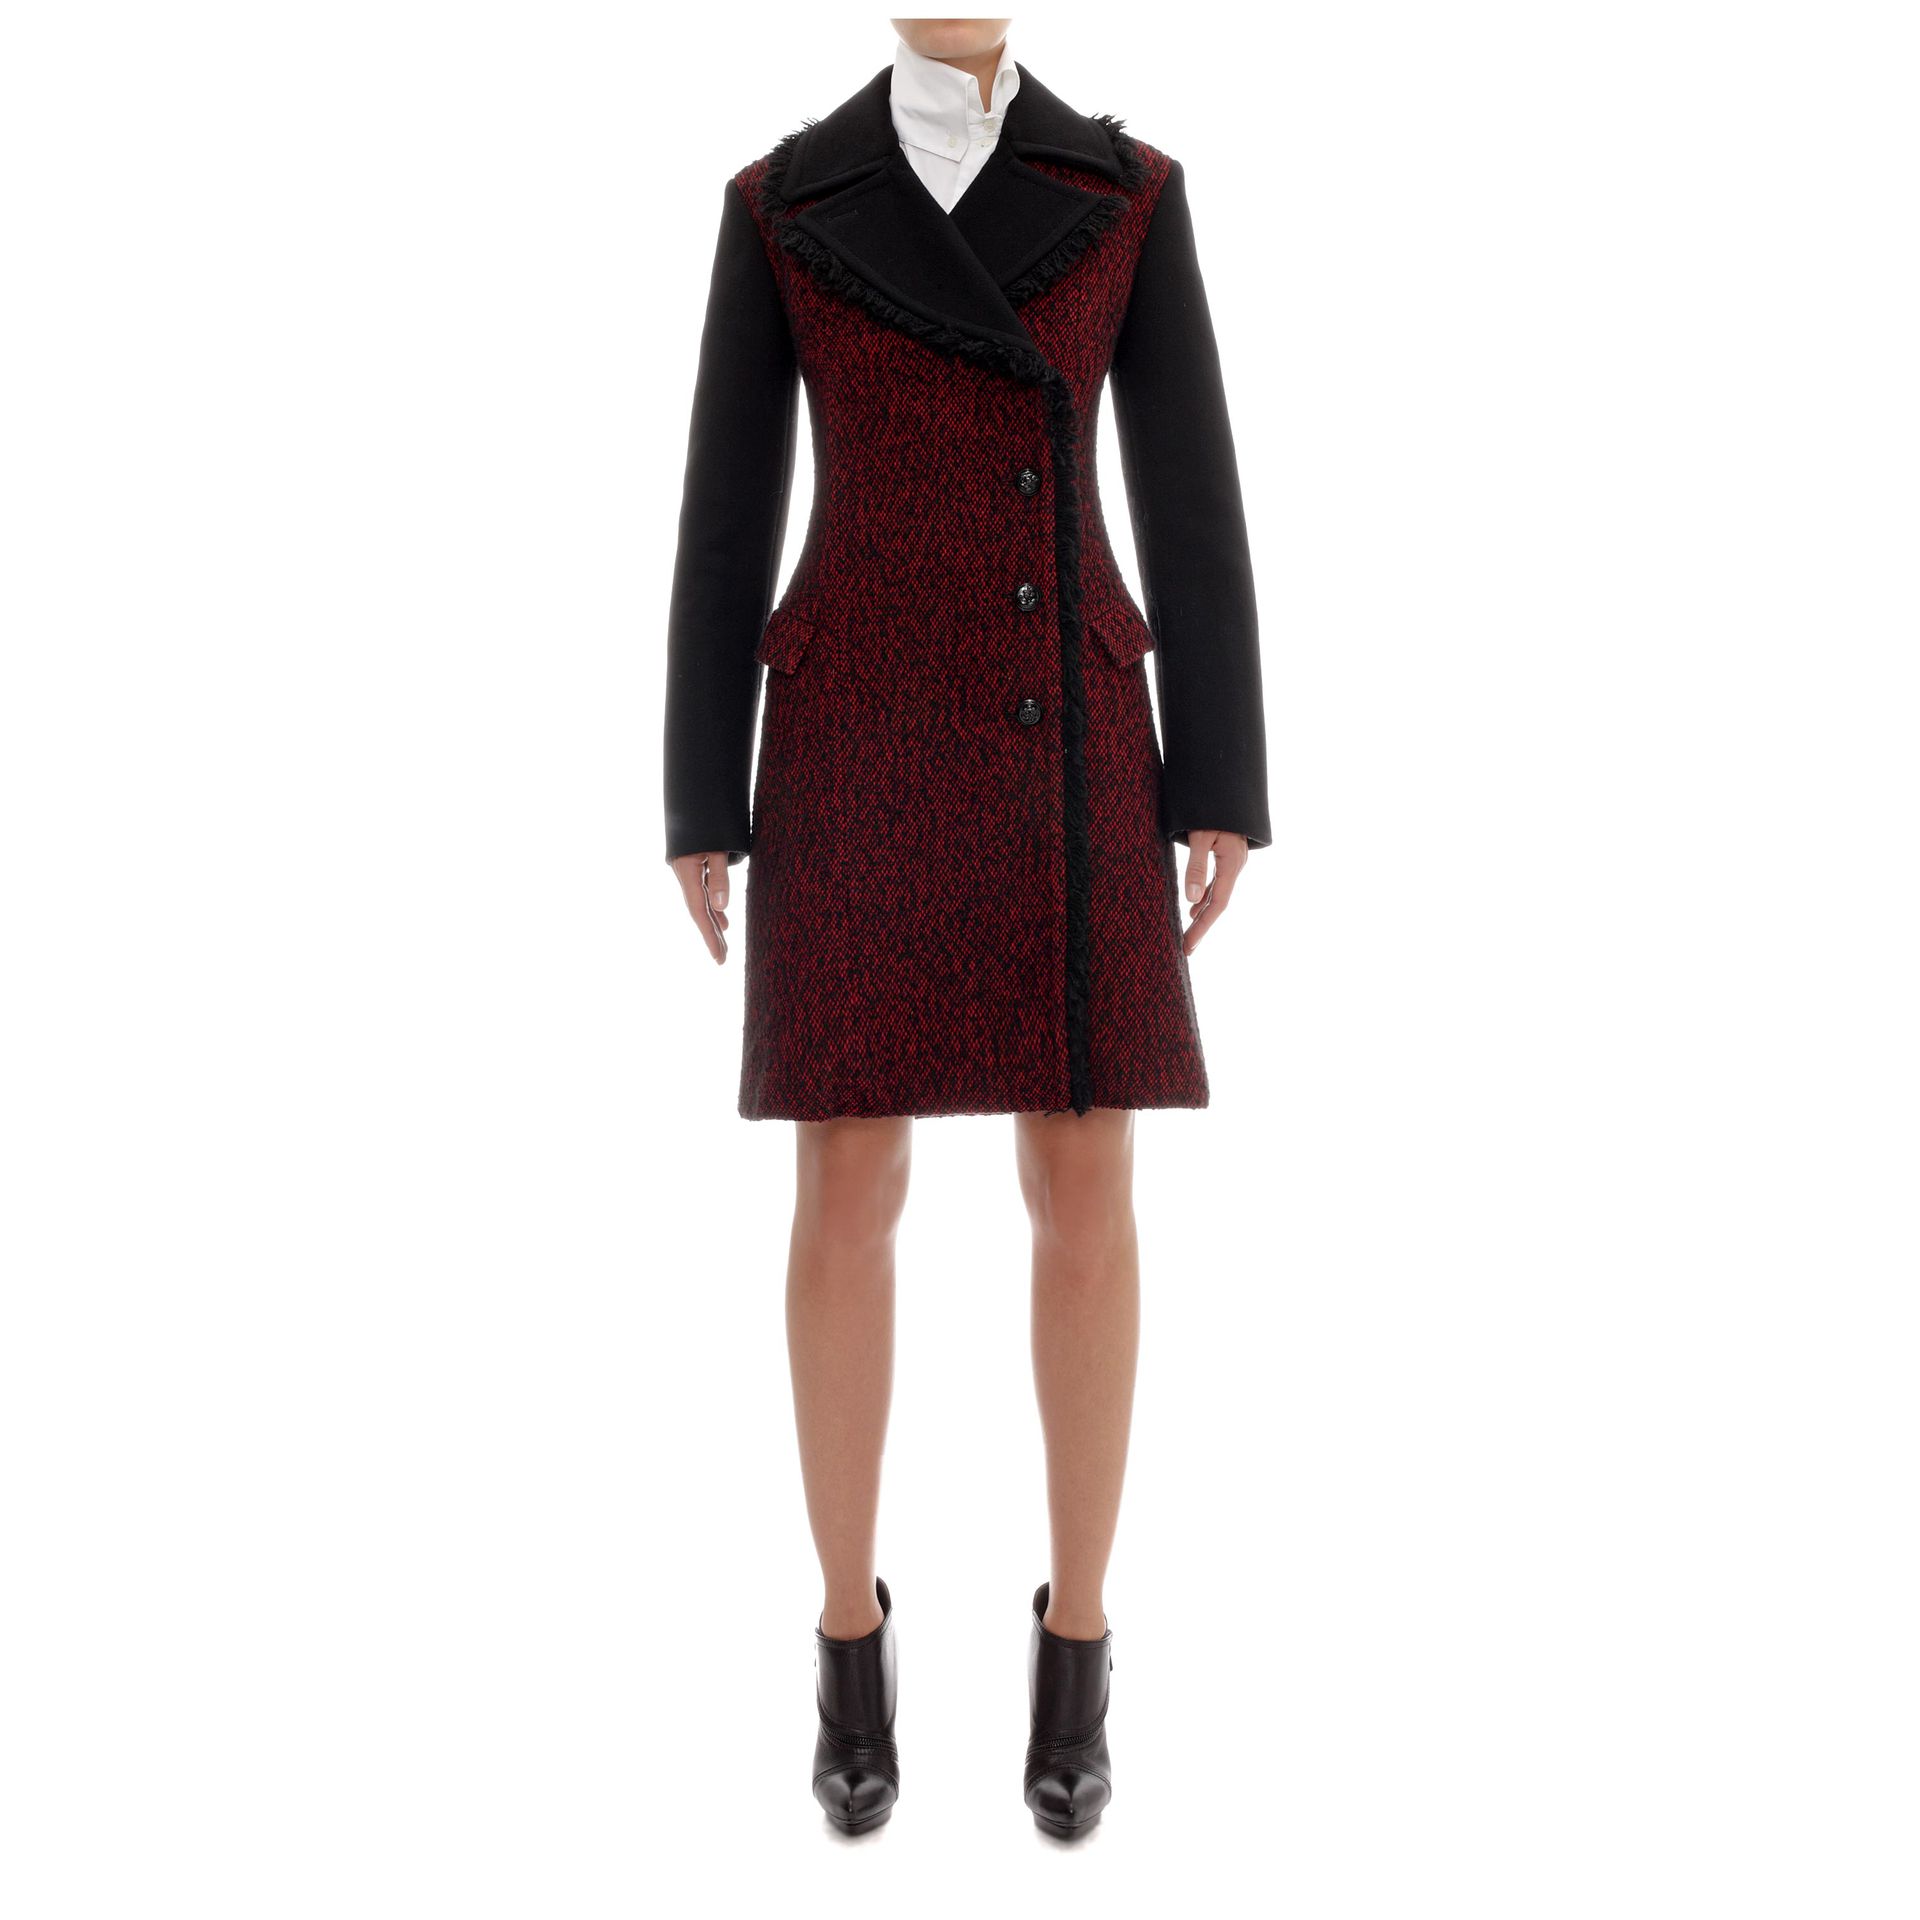 Lyst - Mcq Fringed Tweed Coat in Red